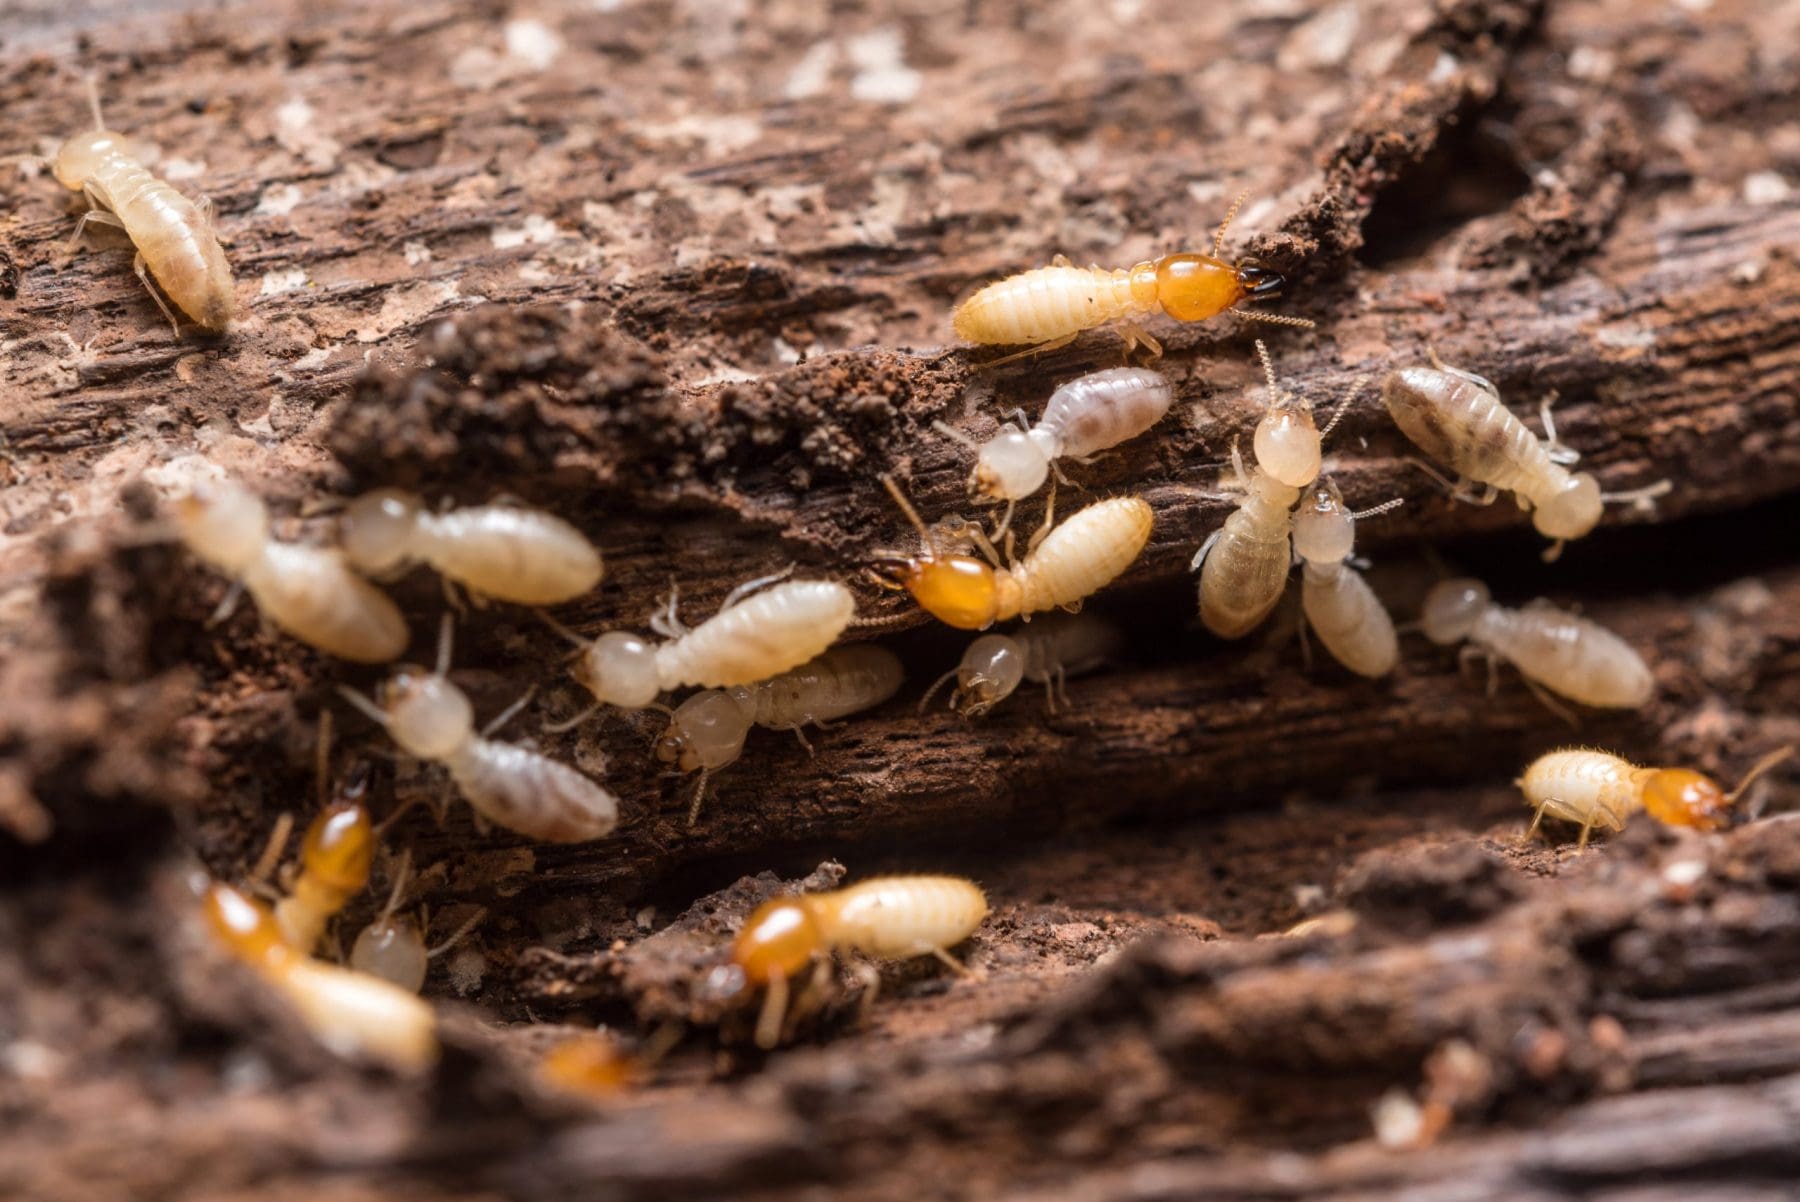 Close up termites on decaying wood.